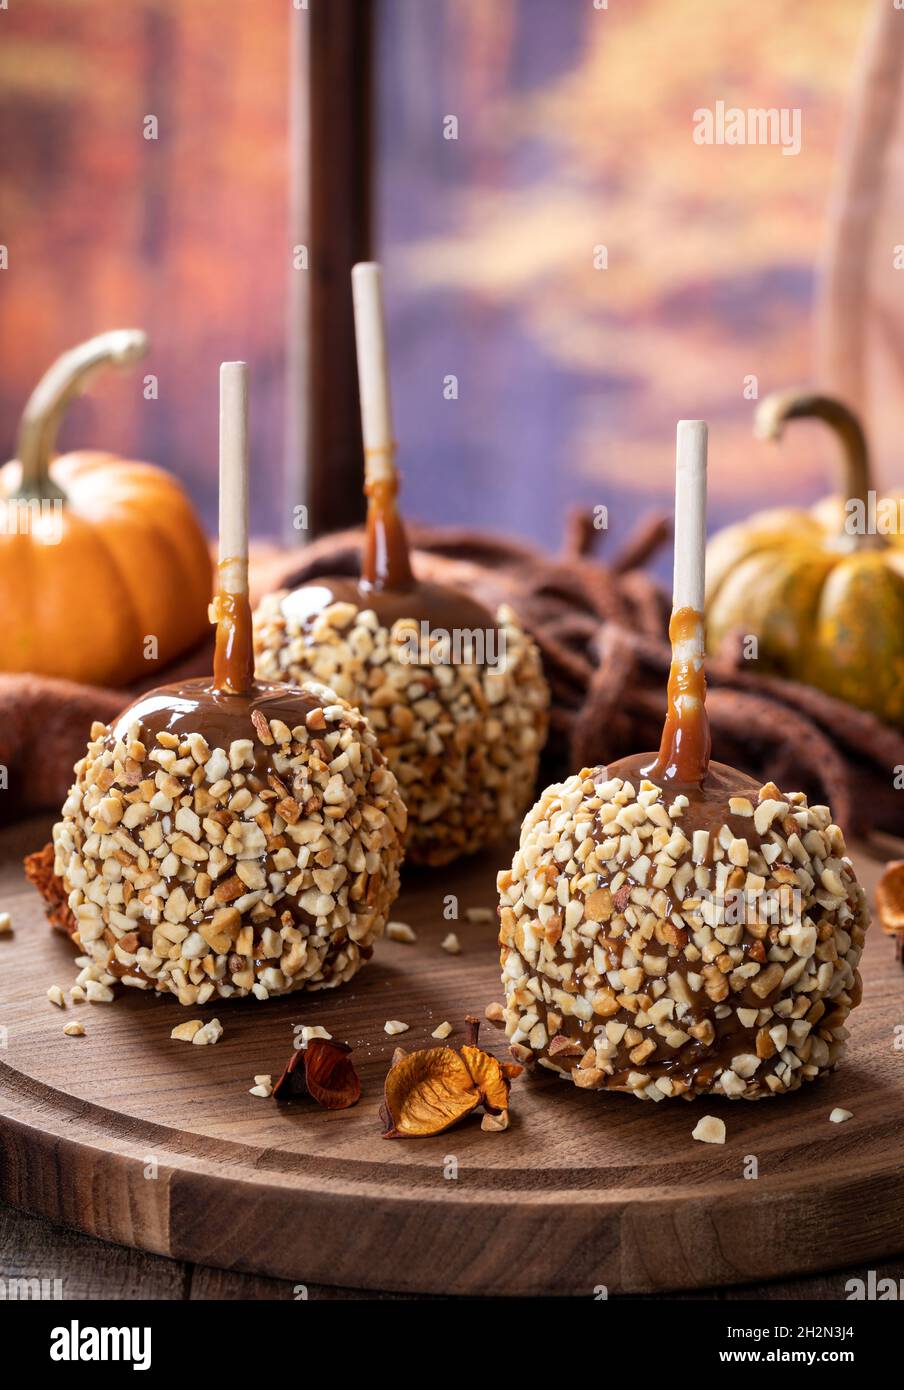 Caramel apples coated with nuts on a wooden platter with autumn background by a window Stock Photo